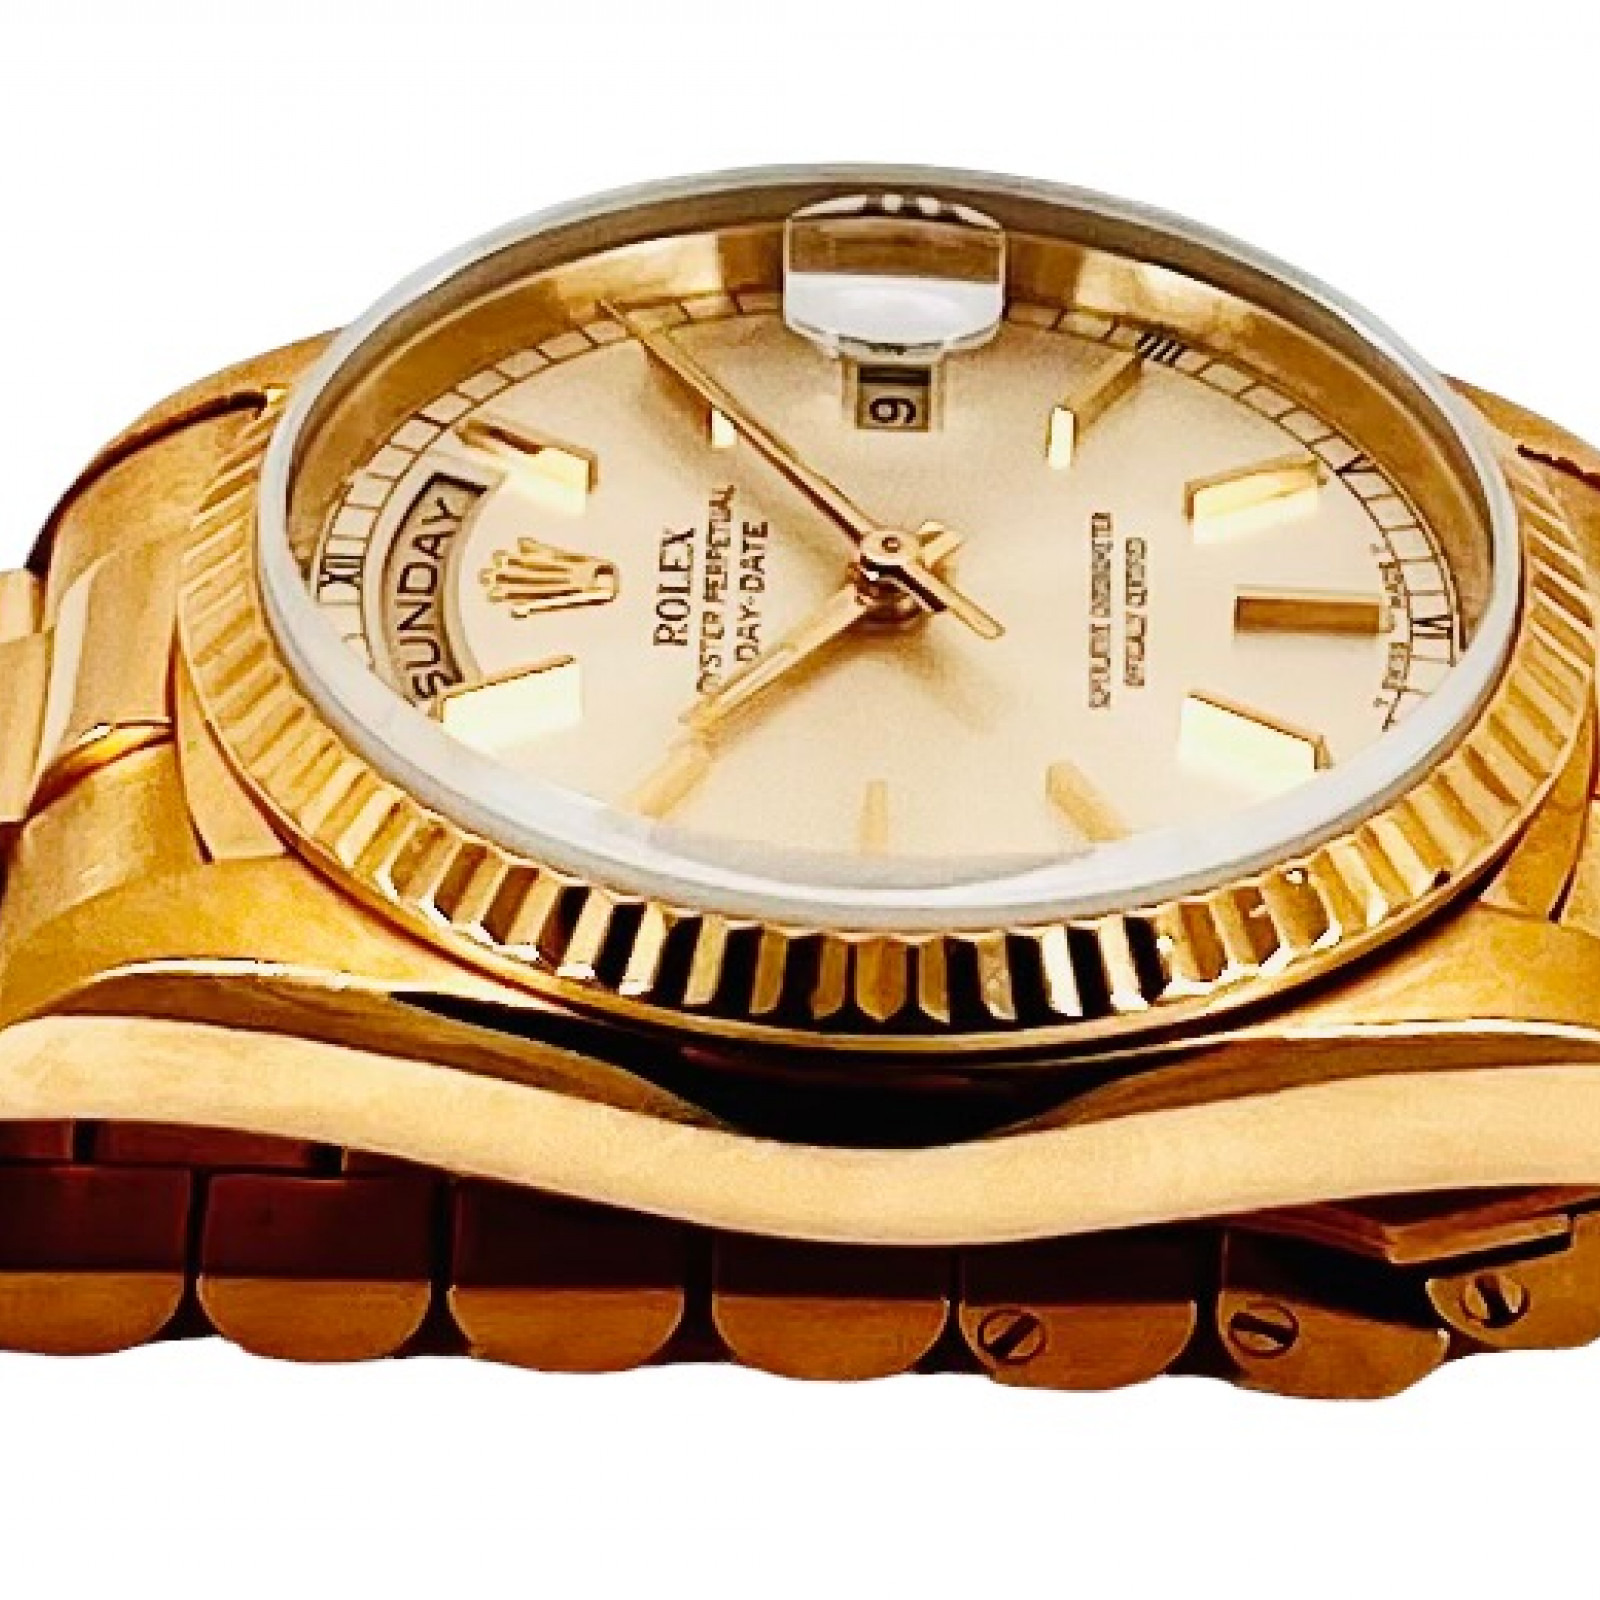 Rolex Day Date President 18 KT Gold